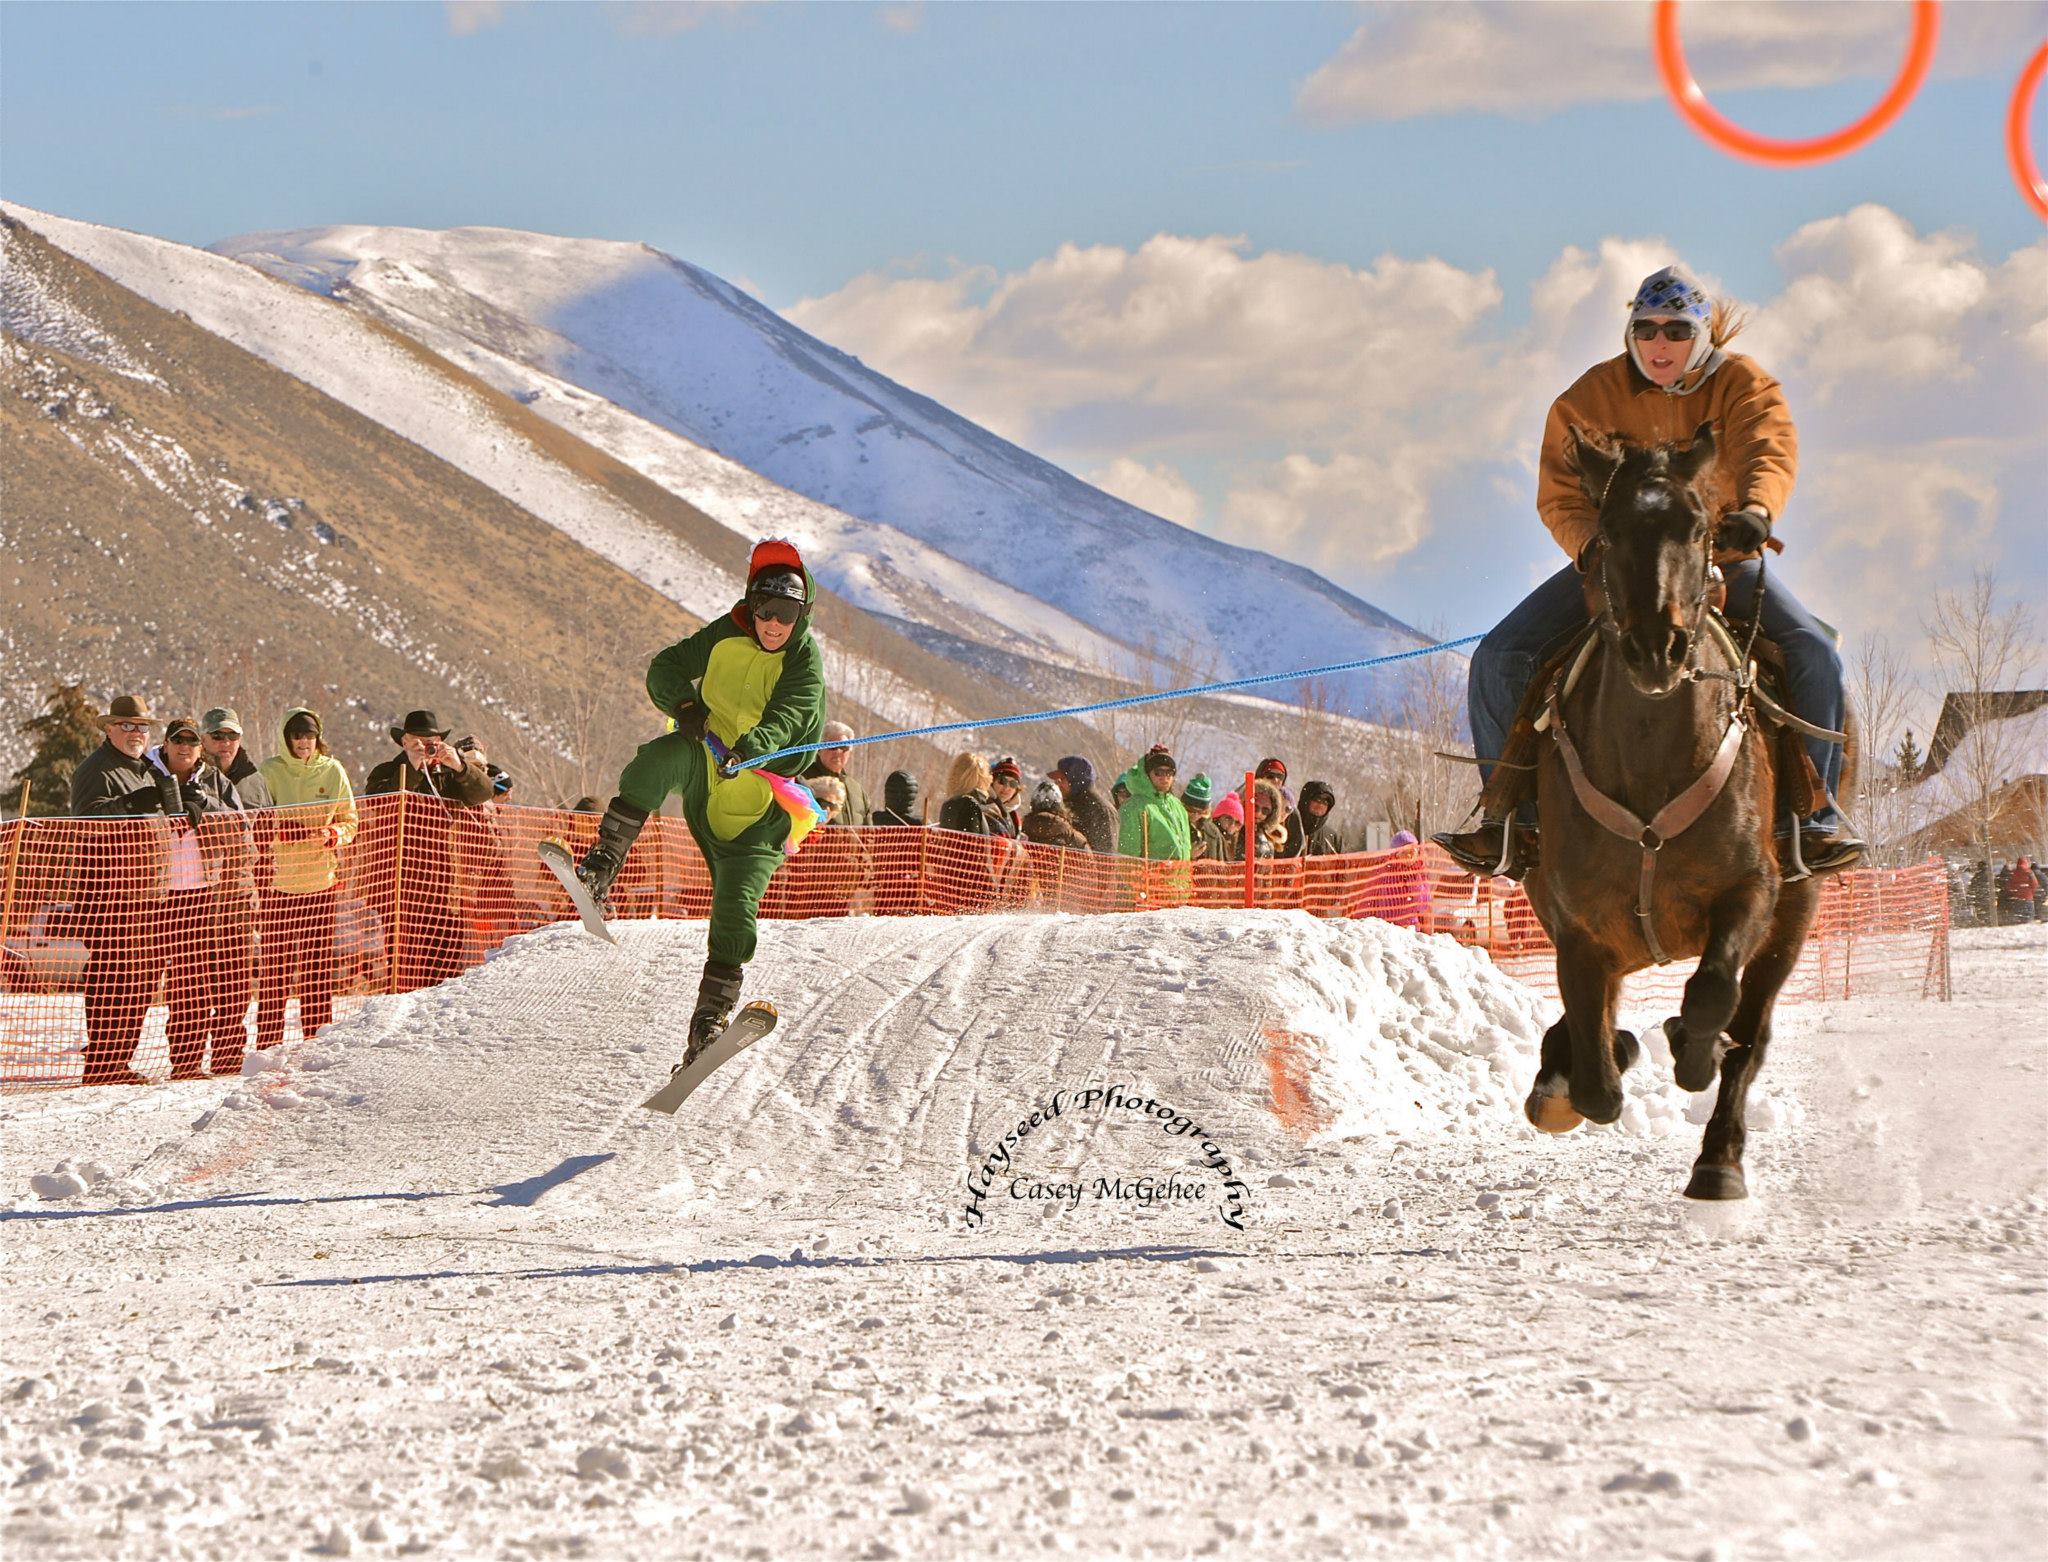 Wood River Extreme Ski Joring | Sun Valley and Bellevue Idaho | photo by Casey McGehee